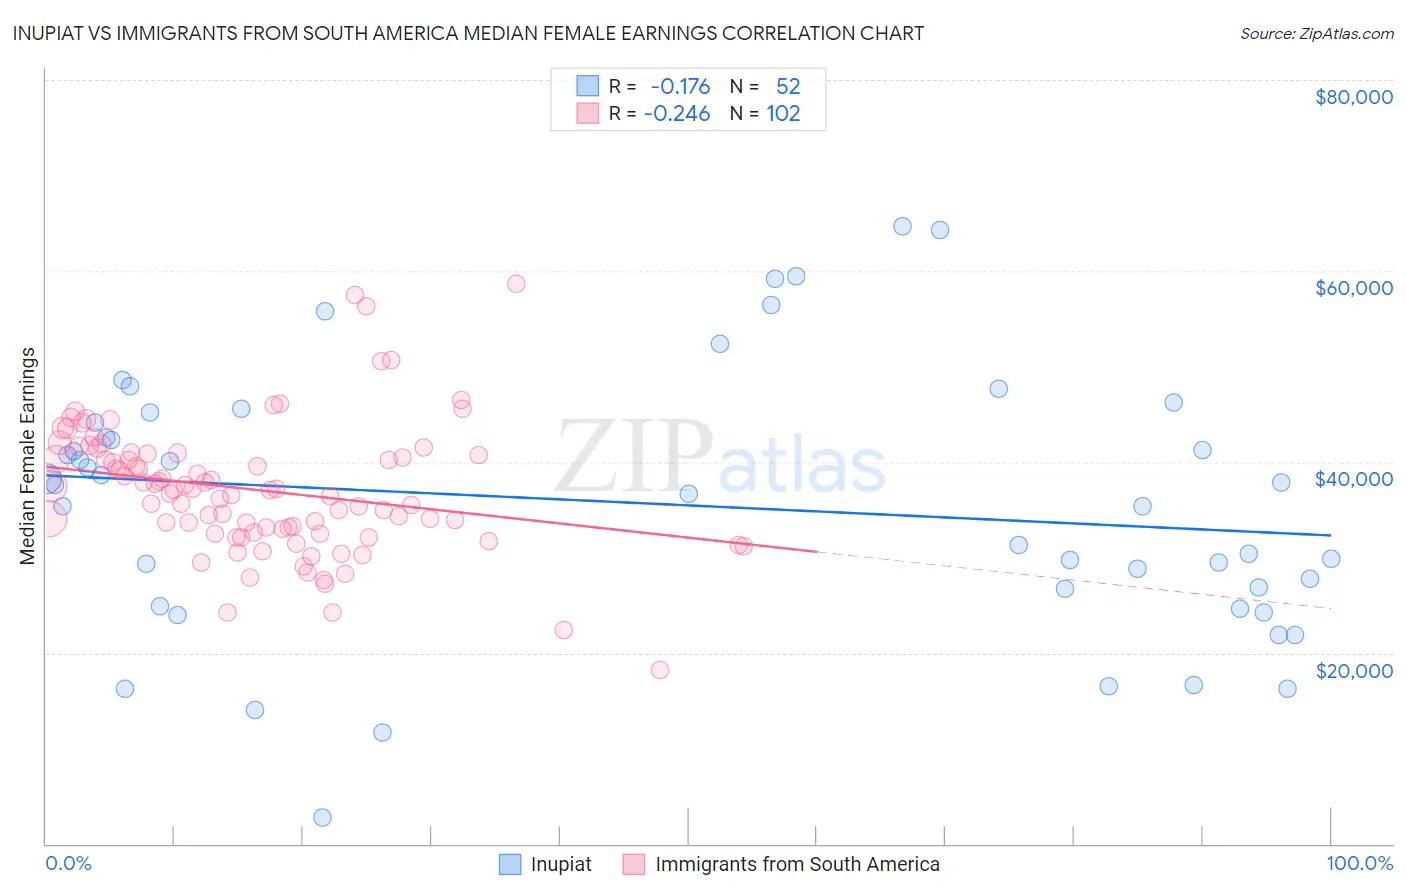 Inupiat vs Immigrants from South America Median Female Earnings